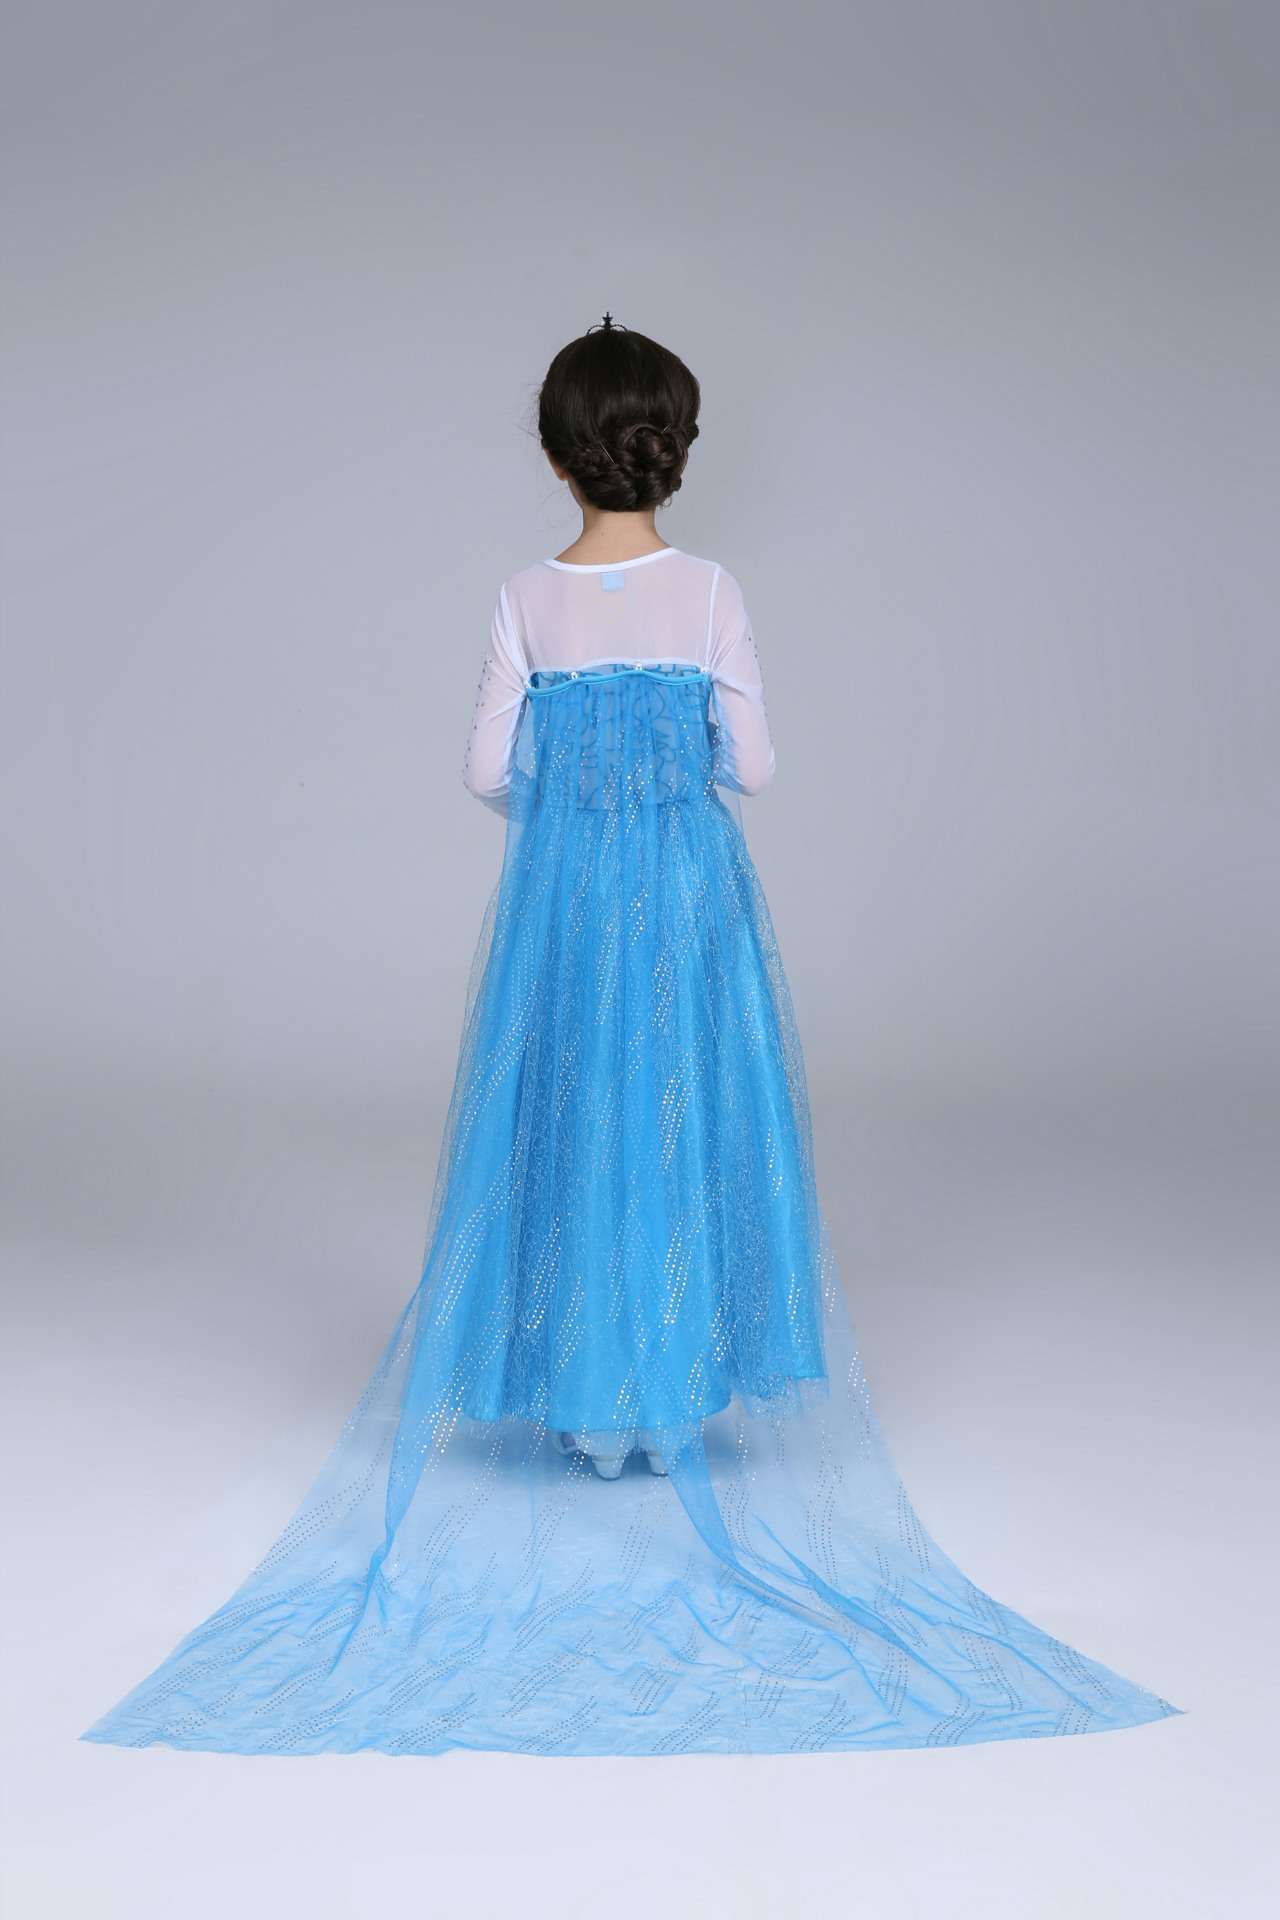 Child Elsa Dress Frozen Princess Costume Disney World Vacation Outfit  Disneyland Cosplay Halloween Dress up Clothes Let It Go - Etsy